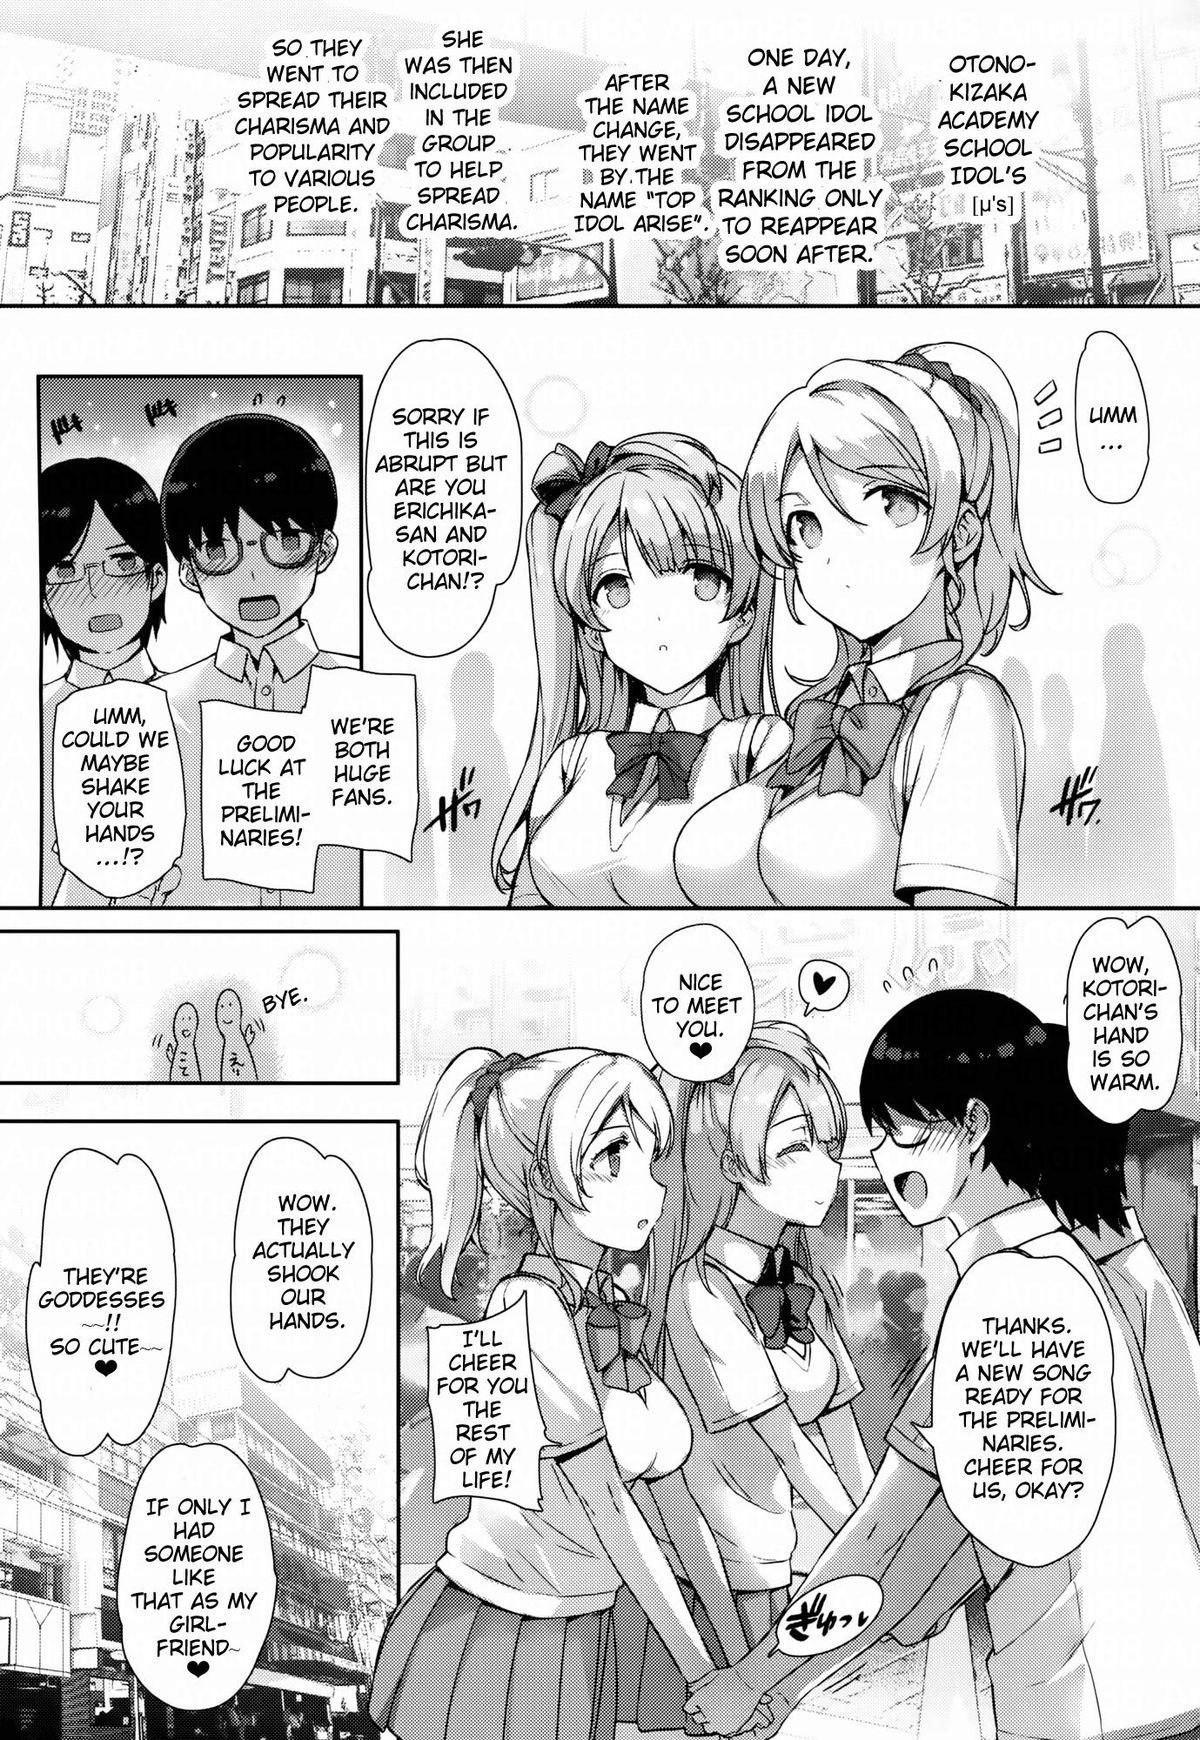 Friend SEX p.a.r.t.y - Love live Big breasts - Page 2